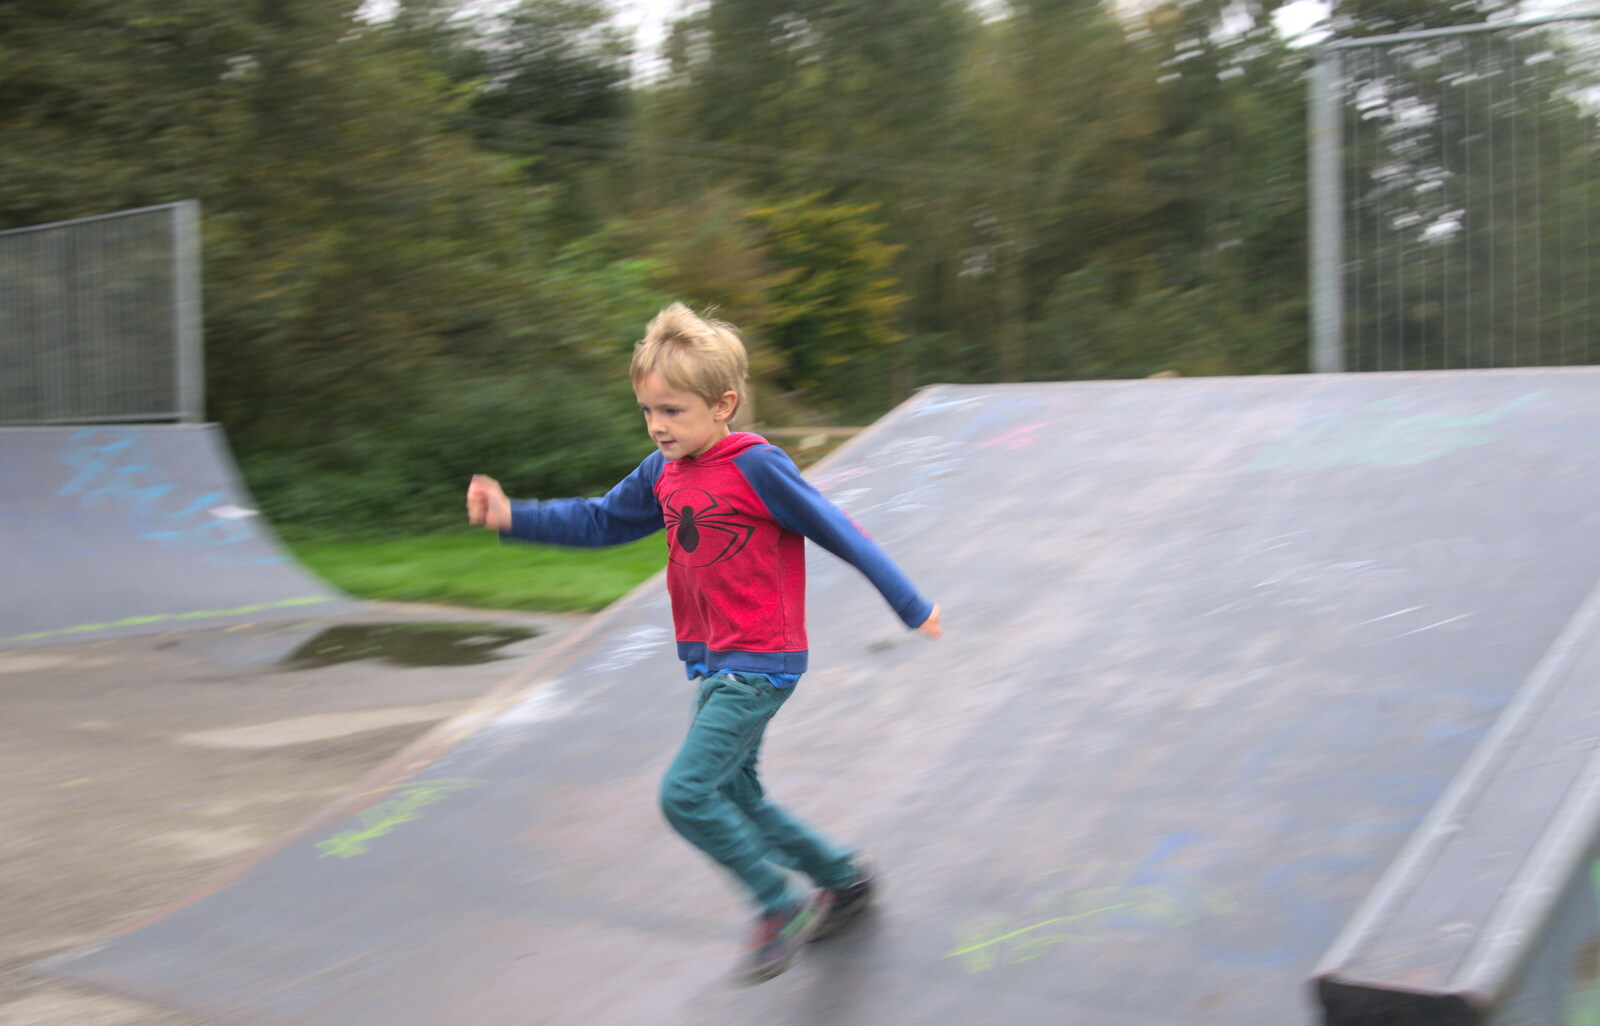 Harry runs down a ramp from Skate Parks and Orange Skies, Brome and Eye, Suffolk - 10th October 2017